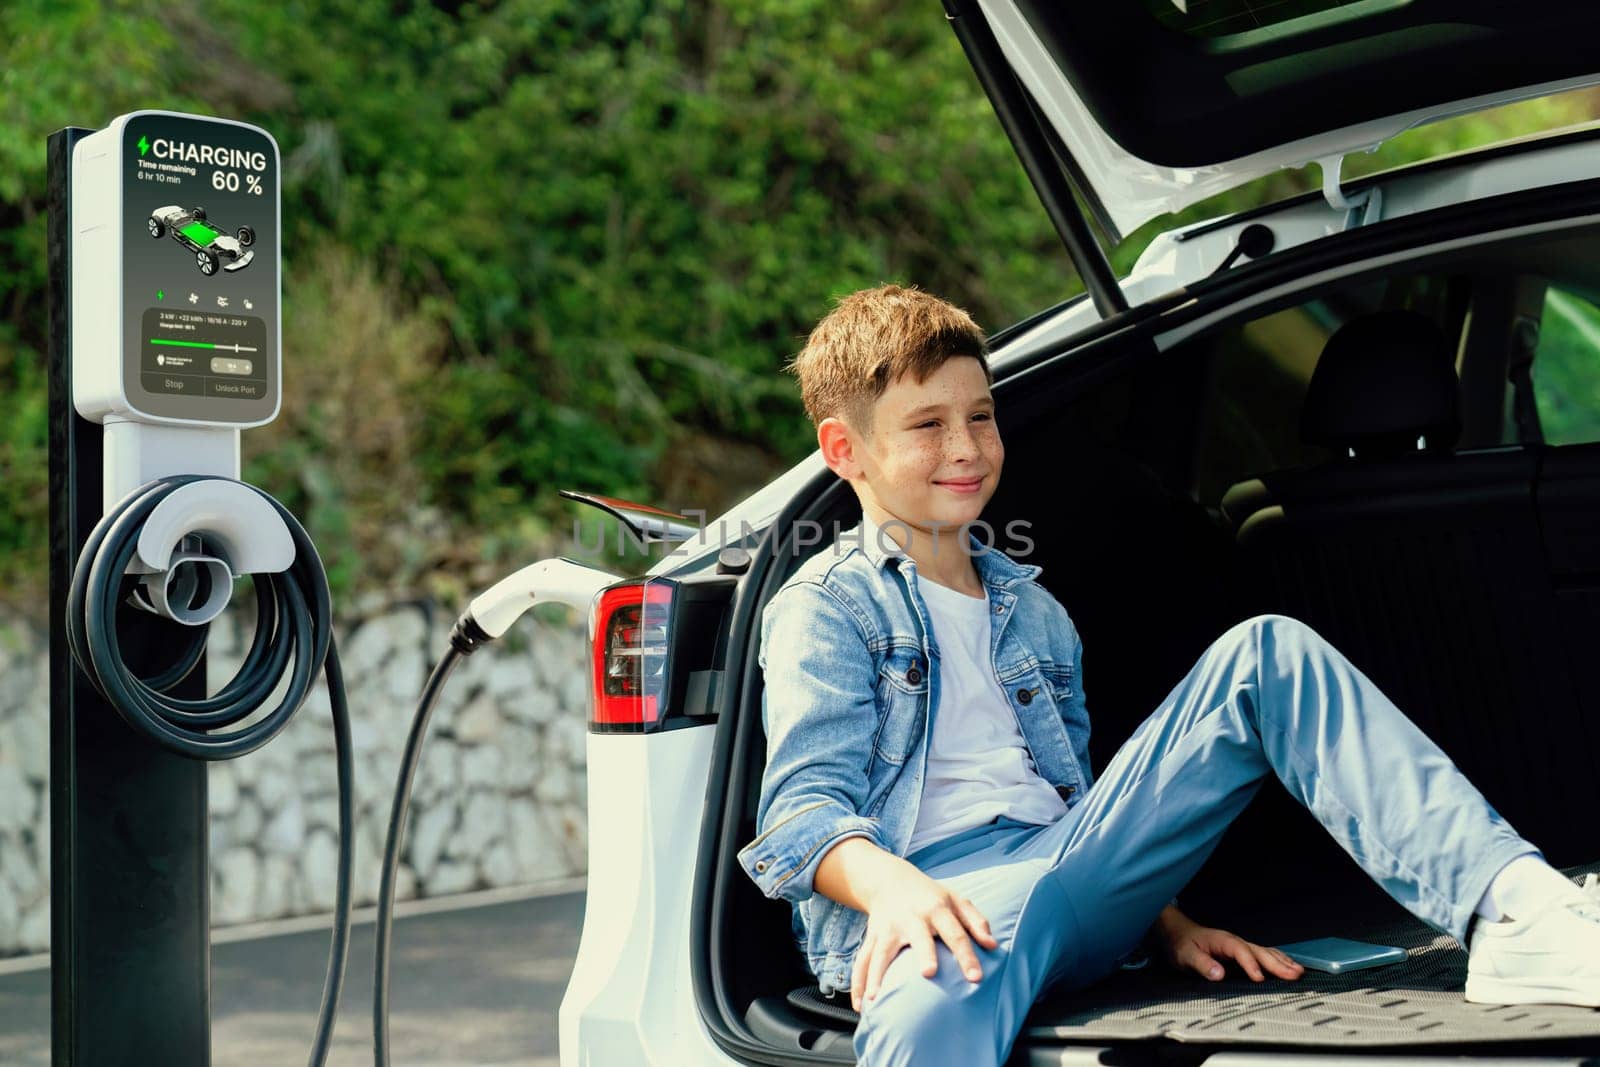 Little boy sitting on car trunk while recharging eco-friendly electric car from EV charging station. EV car road trip travel concept for alternative transportation powered sustainable energy.Perpetual